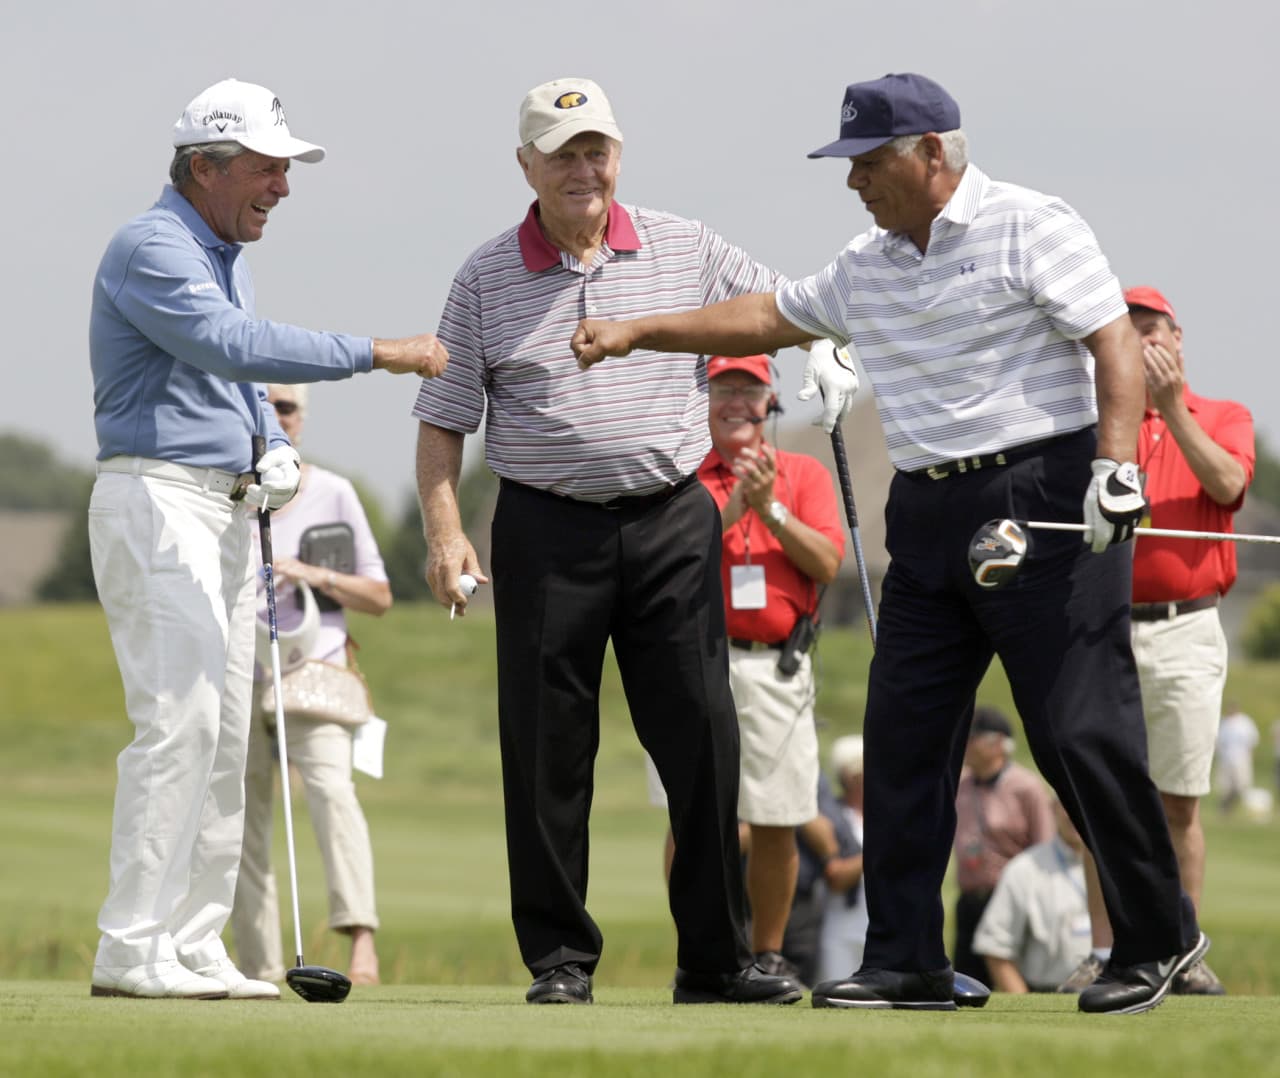 The Champions Tour helped keep golf legends Gary Player, Lee Trevino and Jack Nicklaus (l-r) in the public eye as their success on the PGA Tour began to taper off. (Paul Battaglia/AP)